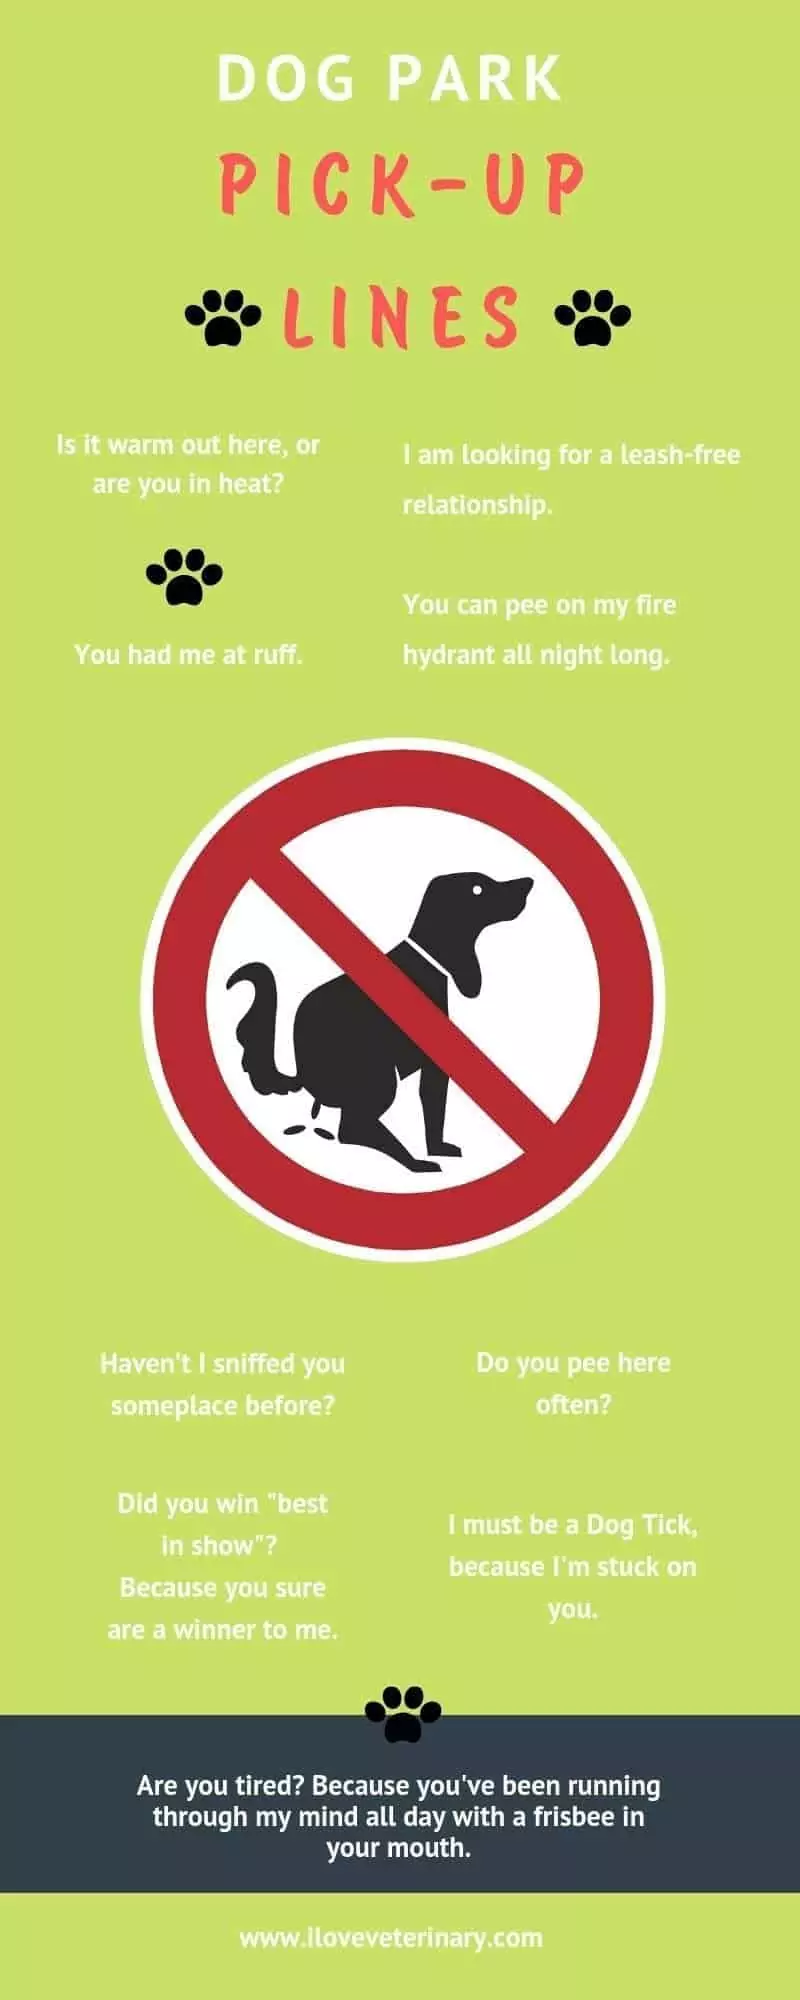 dog park pick up lines infographic I Love Veterinary